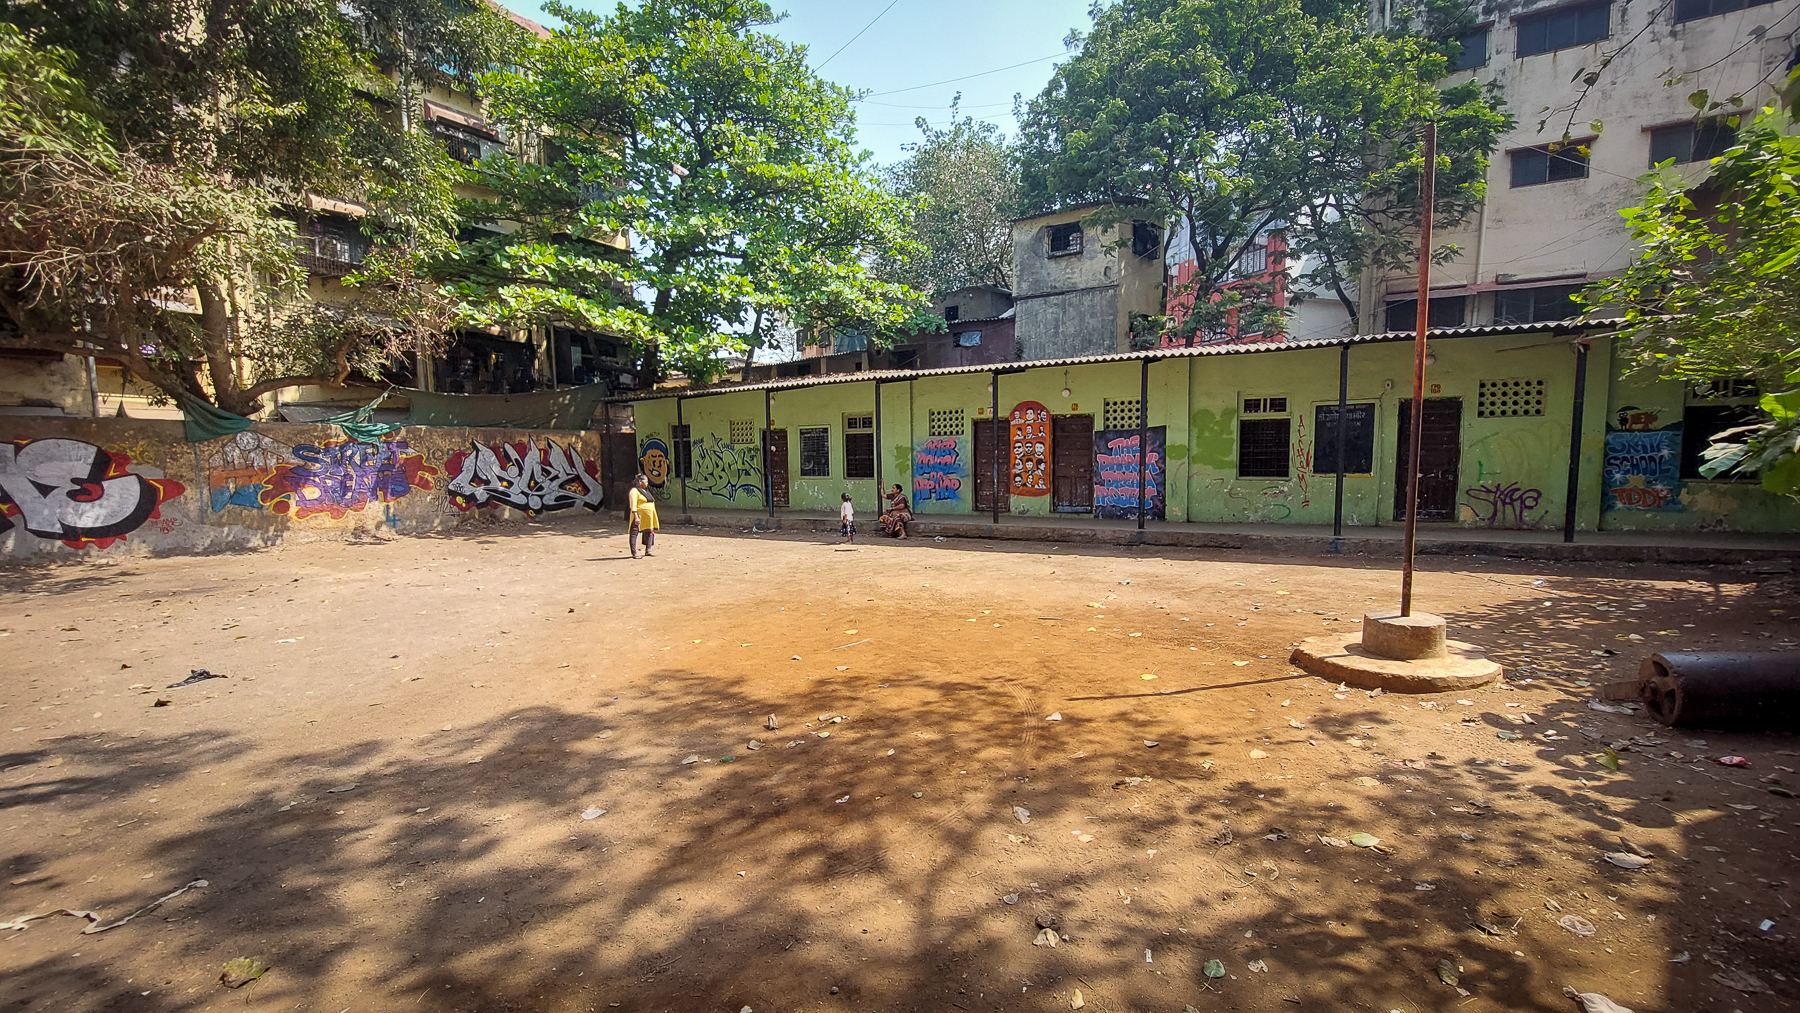 <span  class="uc_style_uc_tiles_grid_image_elementor_uc_items_attribute_title" style="color:#ffffff;">A primary school in Dharavi: simple</span>